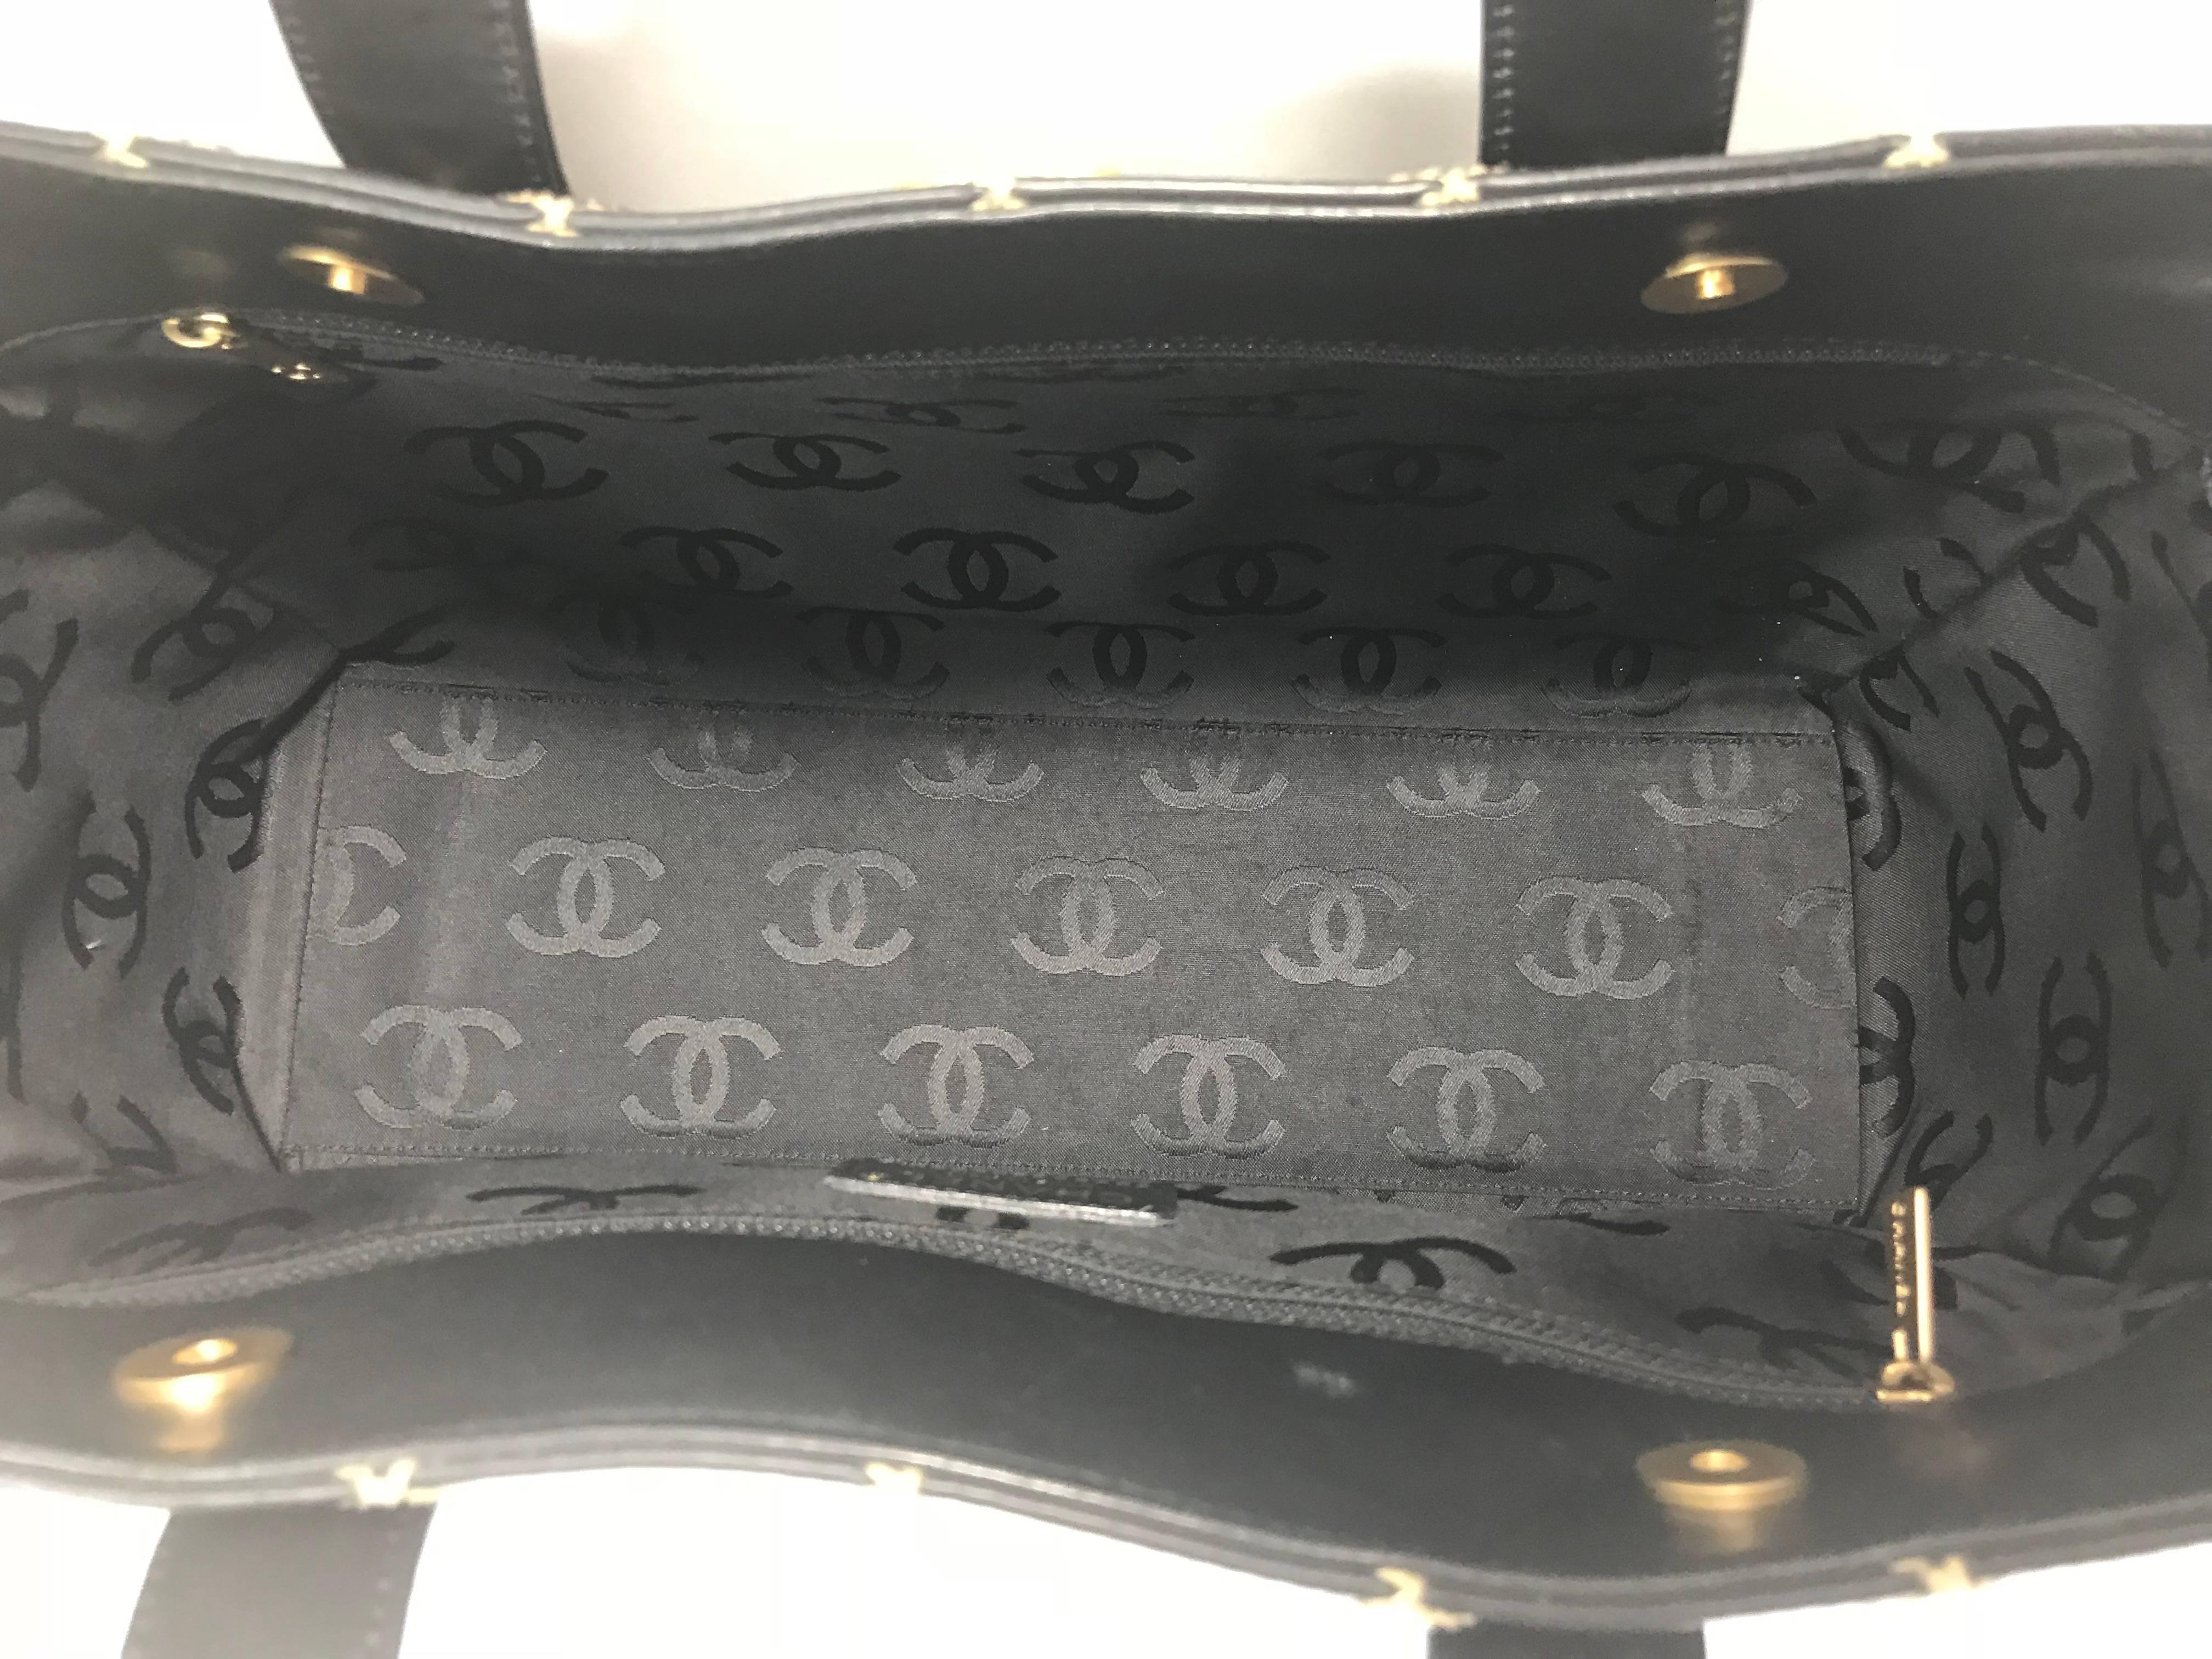 Chanel Quilted Leather Wild Stitch Tote in Black Tote Bag 3